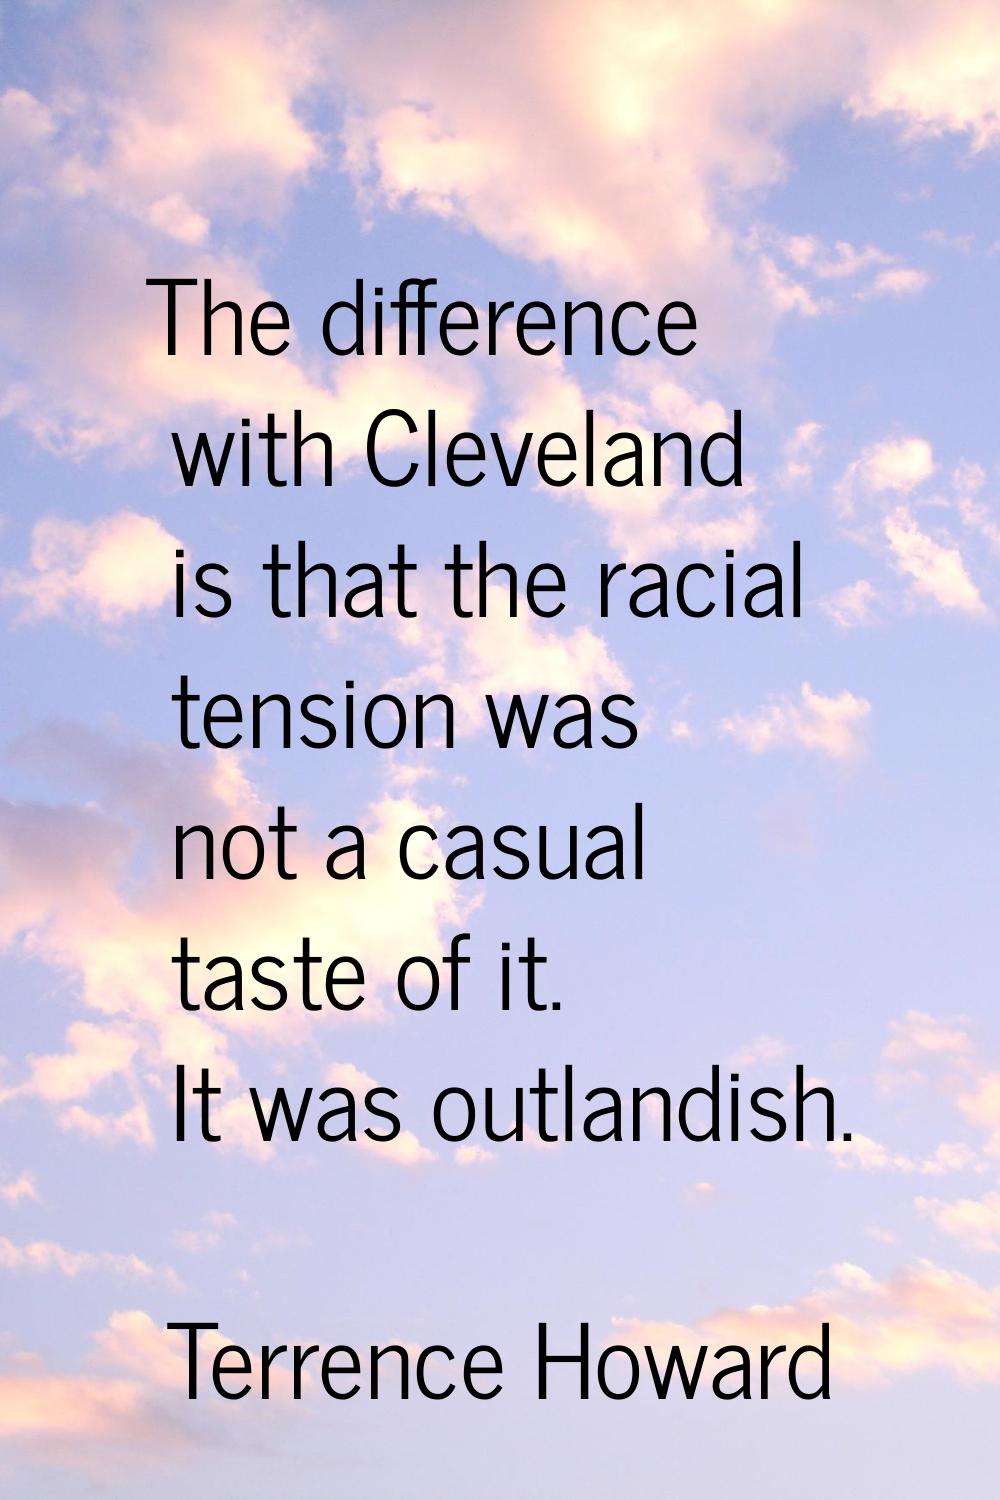 The difference with Cleveland is that the racial tension was not a casual taste of it. It was outla